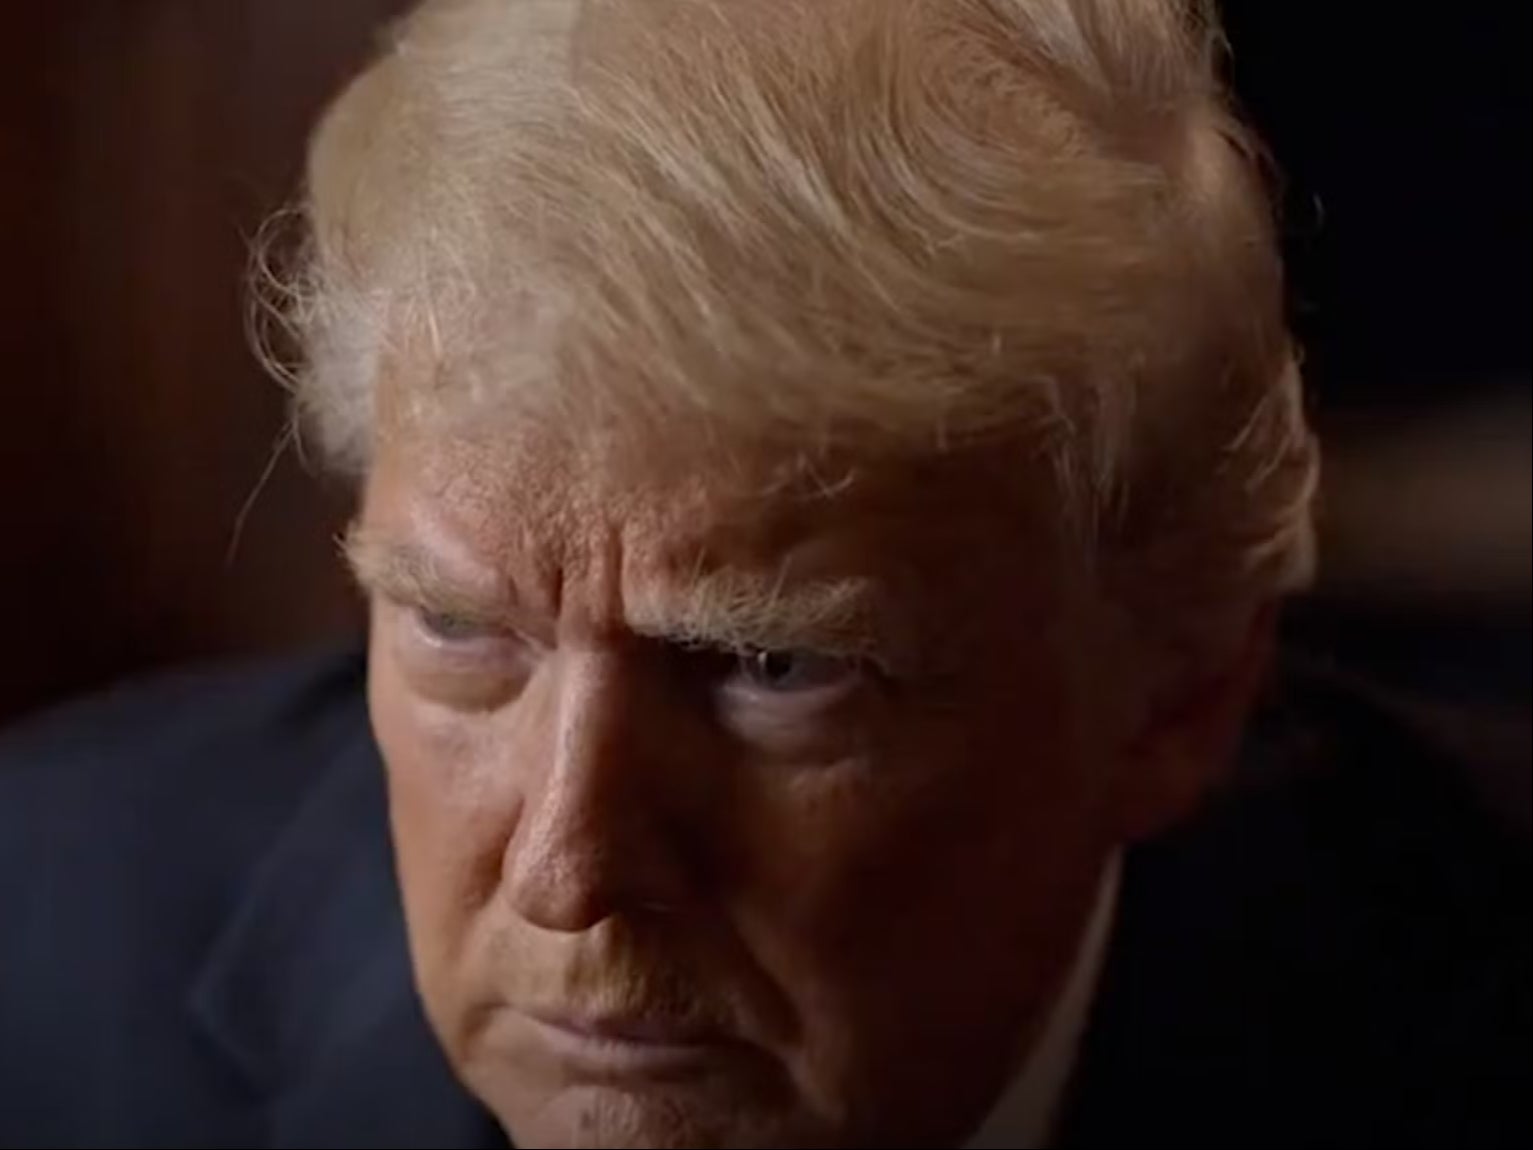 Former President Donald Trump is asked if he will discuss the Capitol riot, to which he replies ‘yep.’ The image is a screenshot from the documentary ‘Unprecedented.’ The documentary’s filmmaker, Alex Holder, was subpoenaed by the House Select Committee and asked to turn over all of his footage.